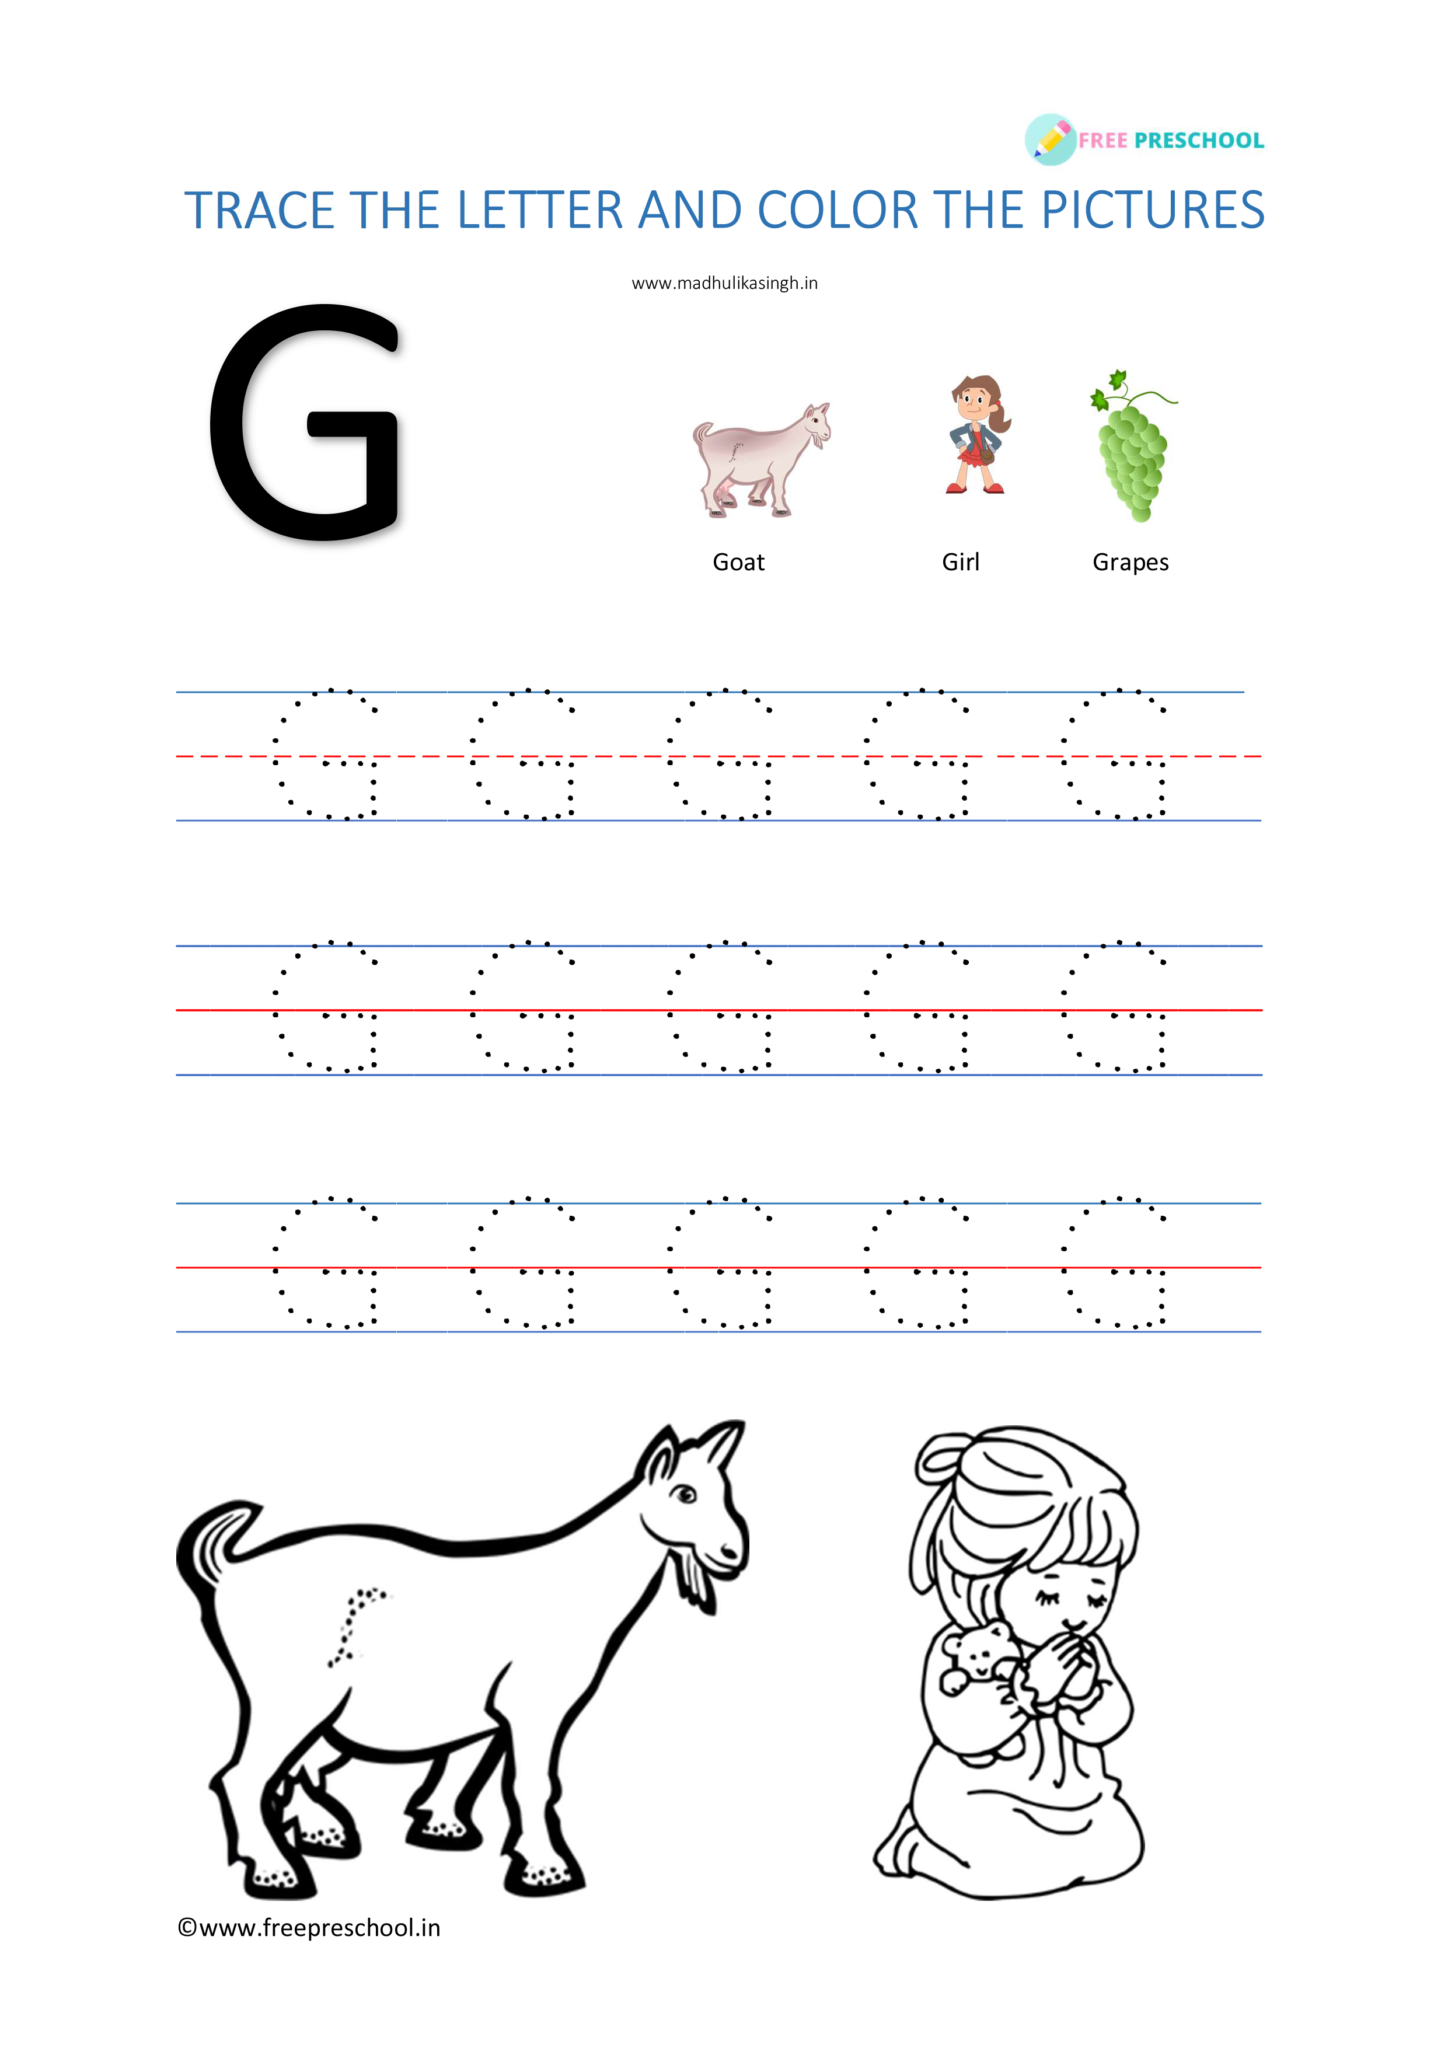 alphabet-tracing-worksheets-for-preschool-a-to-z-156-pages-free-preschool